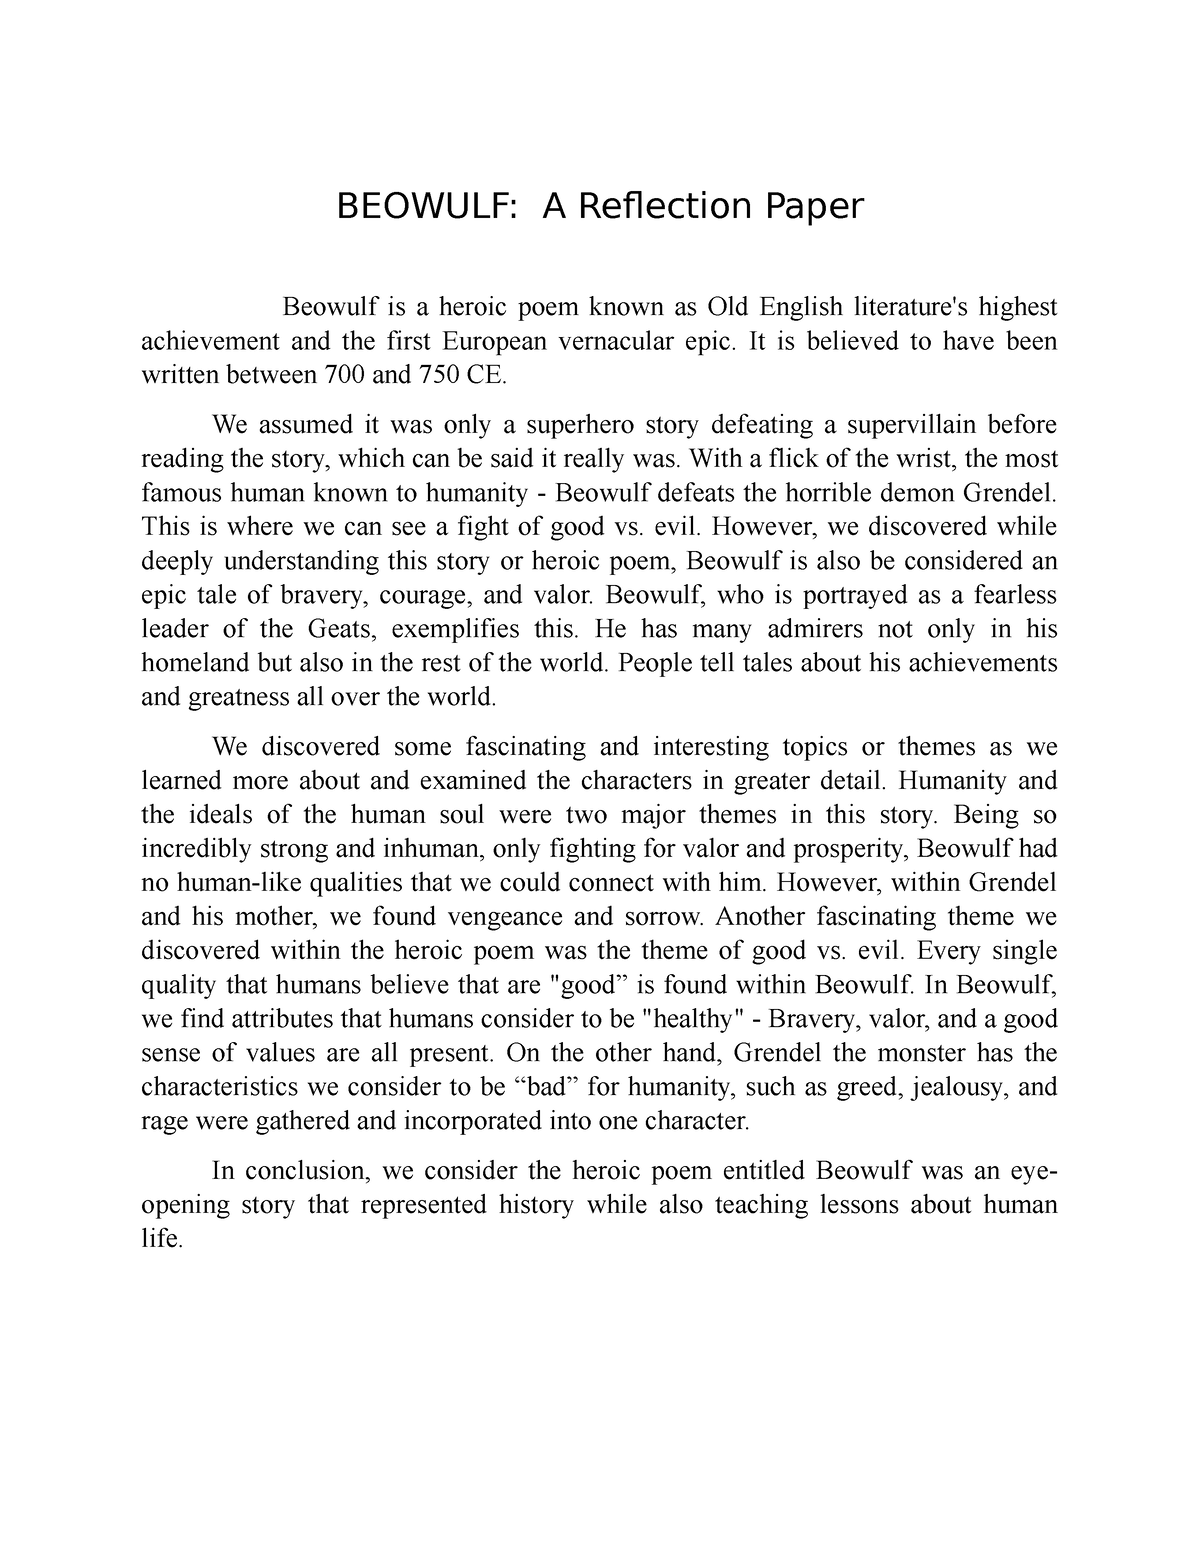 literary research paper beowulf